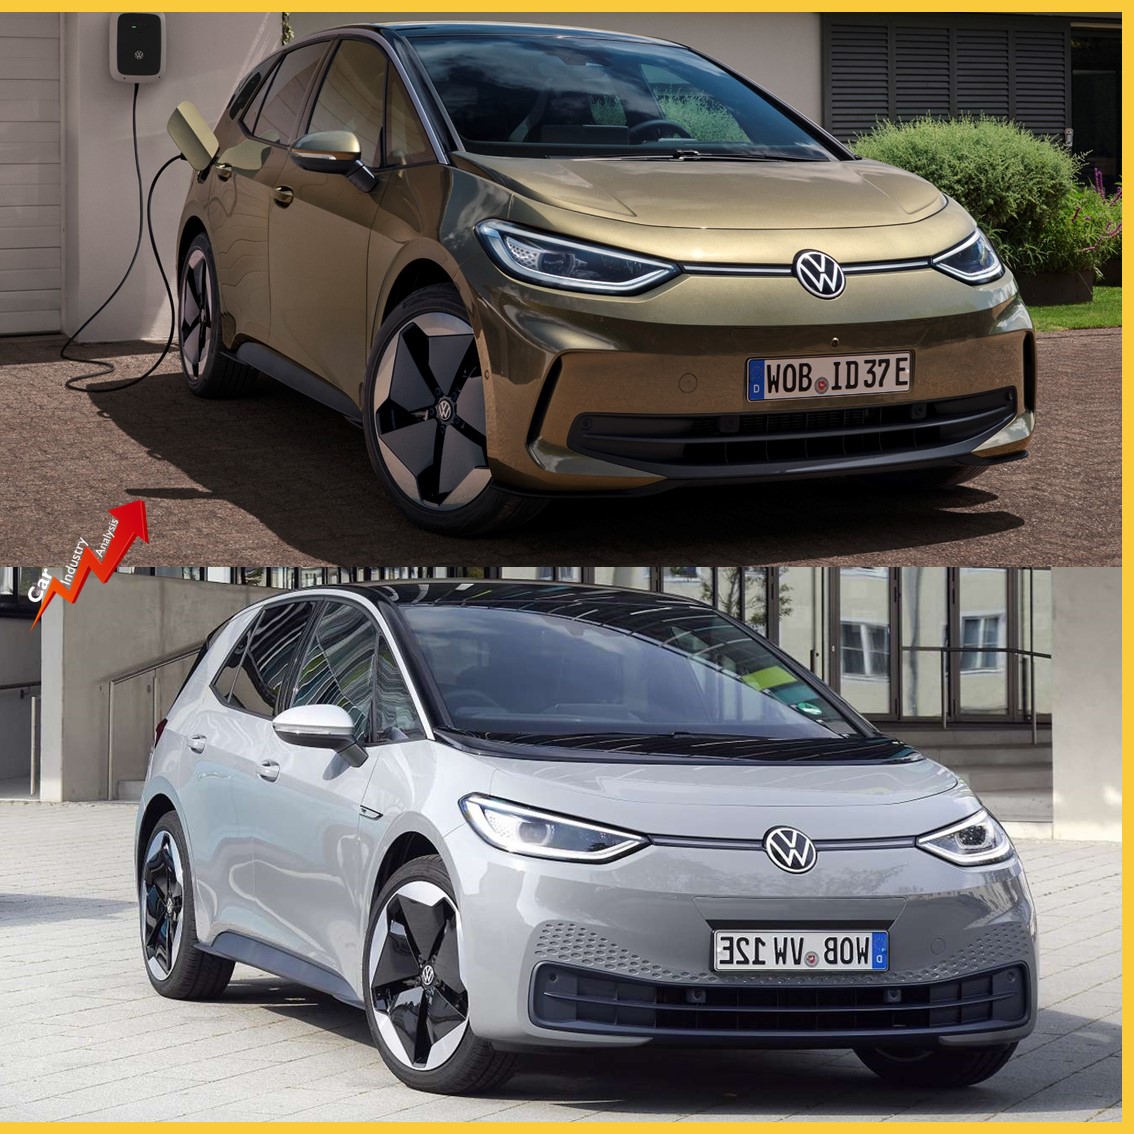 A mild facelift for the #VolkswagenID3, 3 years after its introduction and relatively poor commercial performance (214k units). VW calls it the 2nd generation of the ID.3, but as you can see from the images, it is basically the same car.